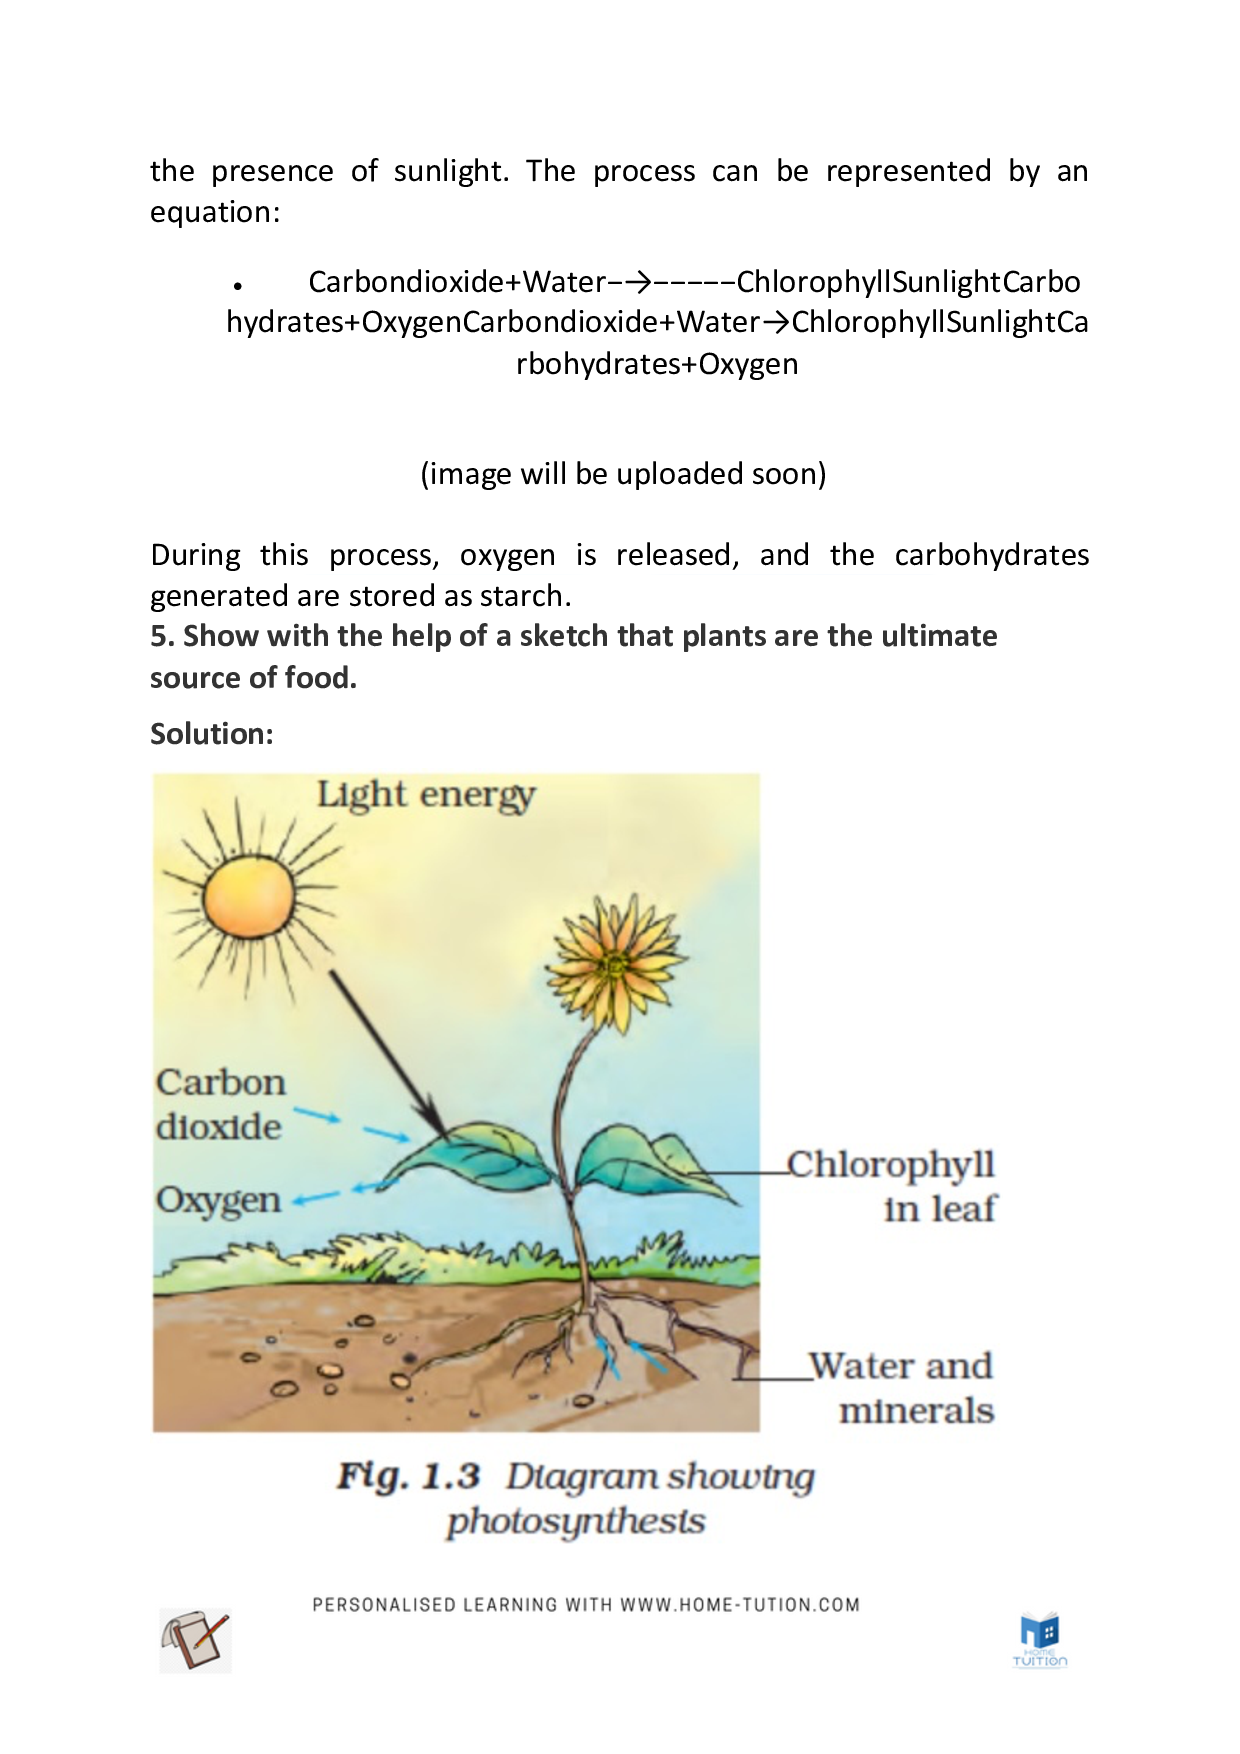 Class 7 Science Chapter 1 – Nutrition in Plants